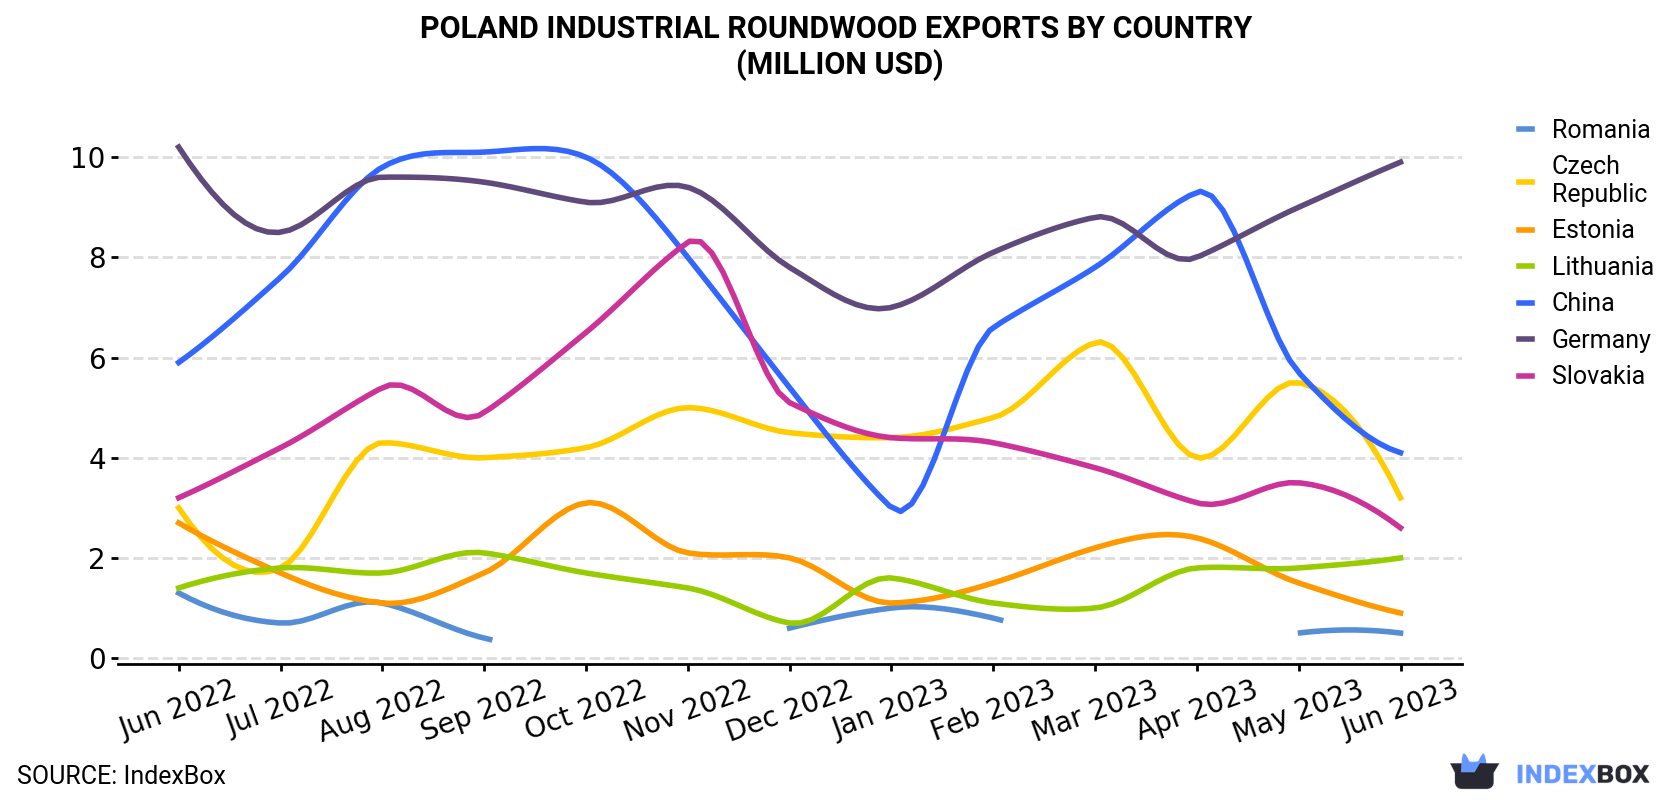 Poland Industrial Roundwood Exports By Country (Million USD)